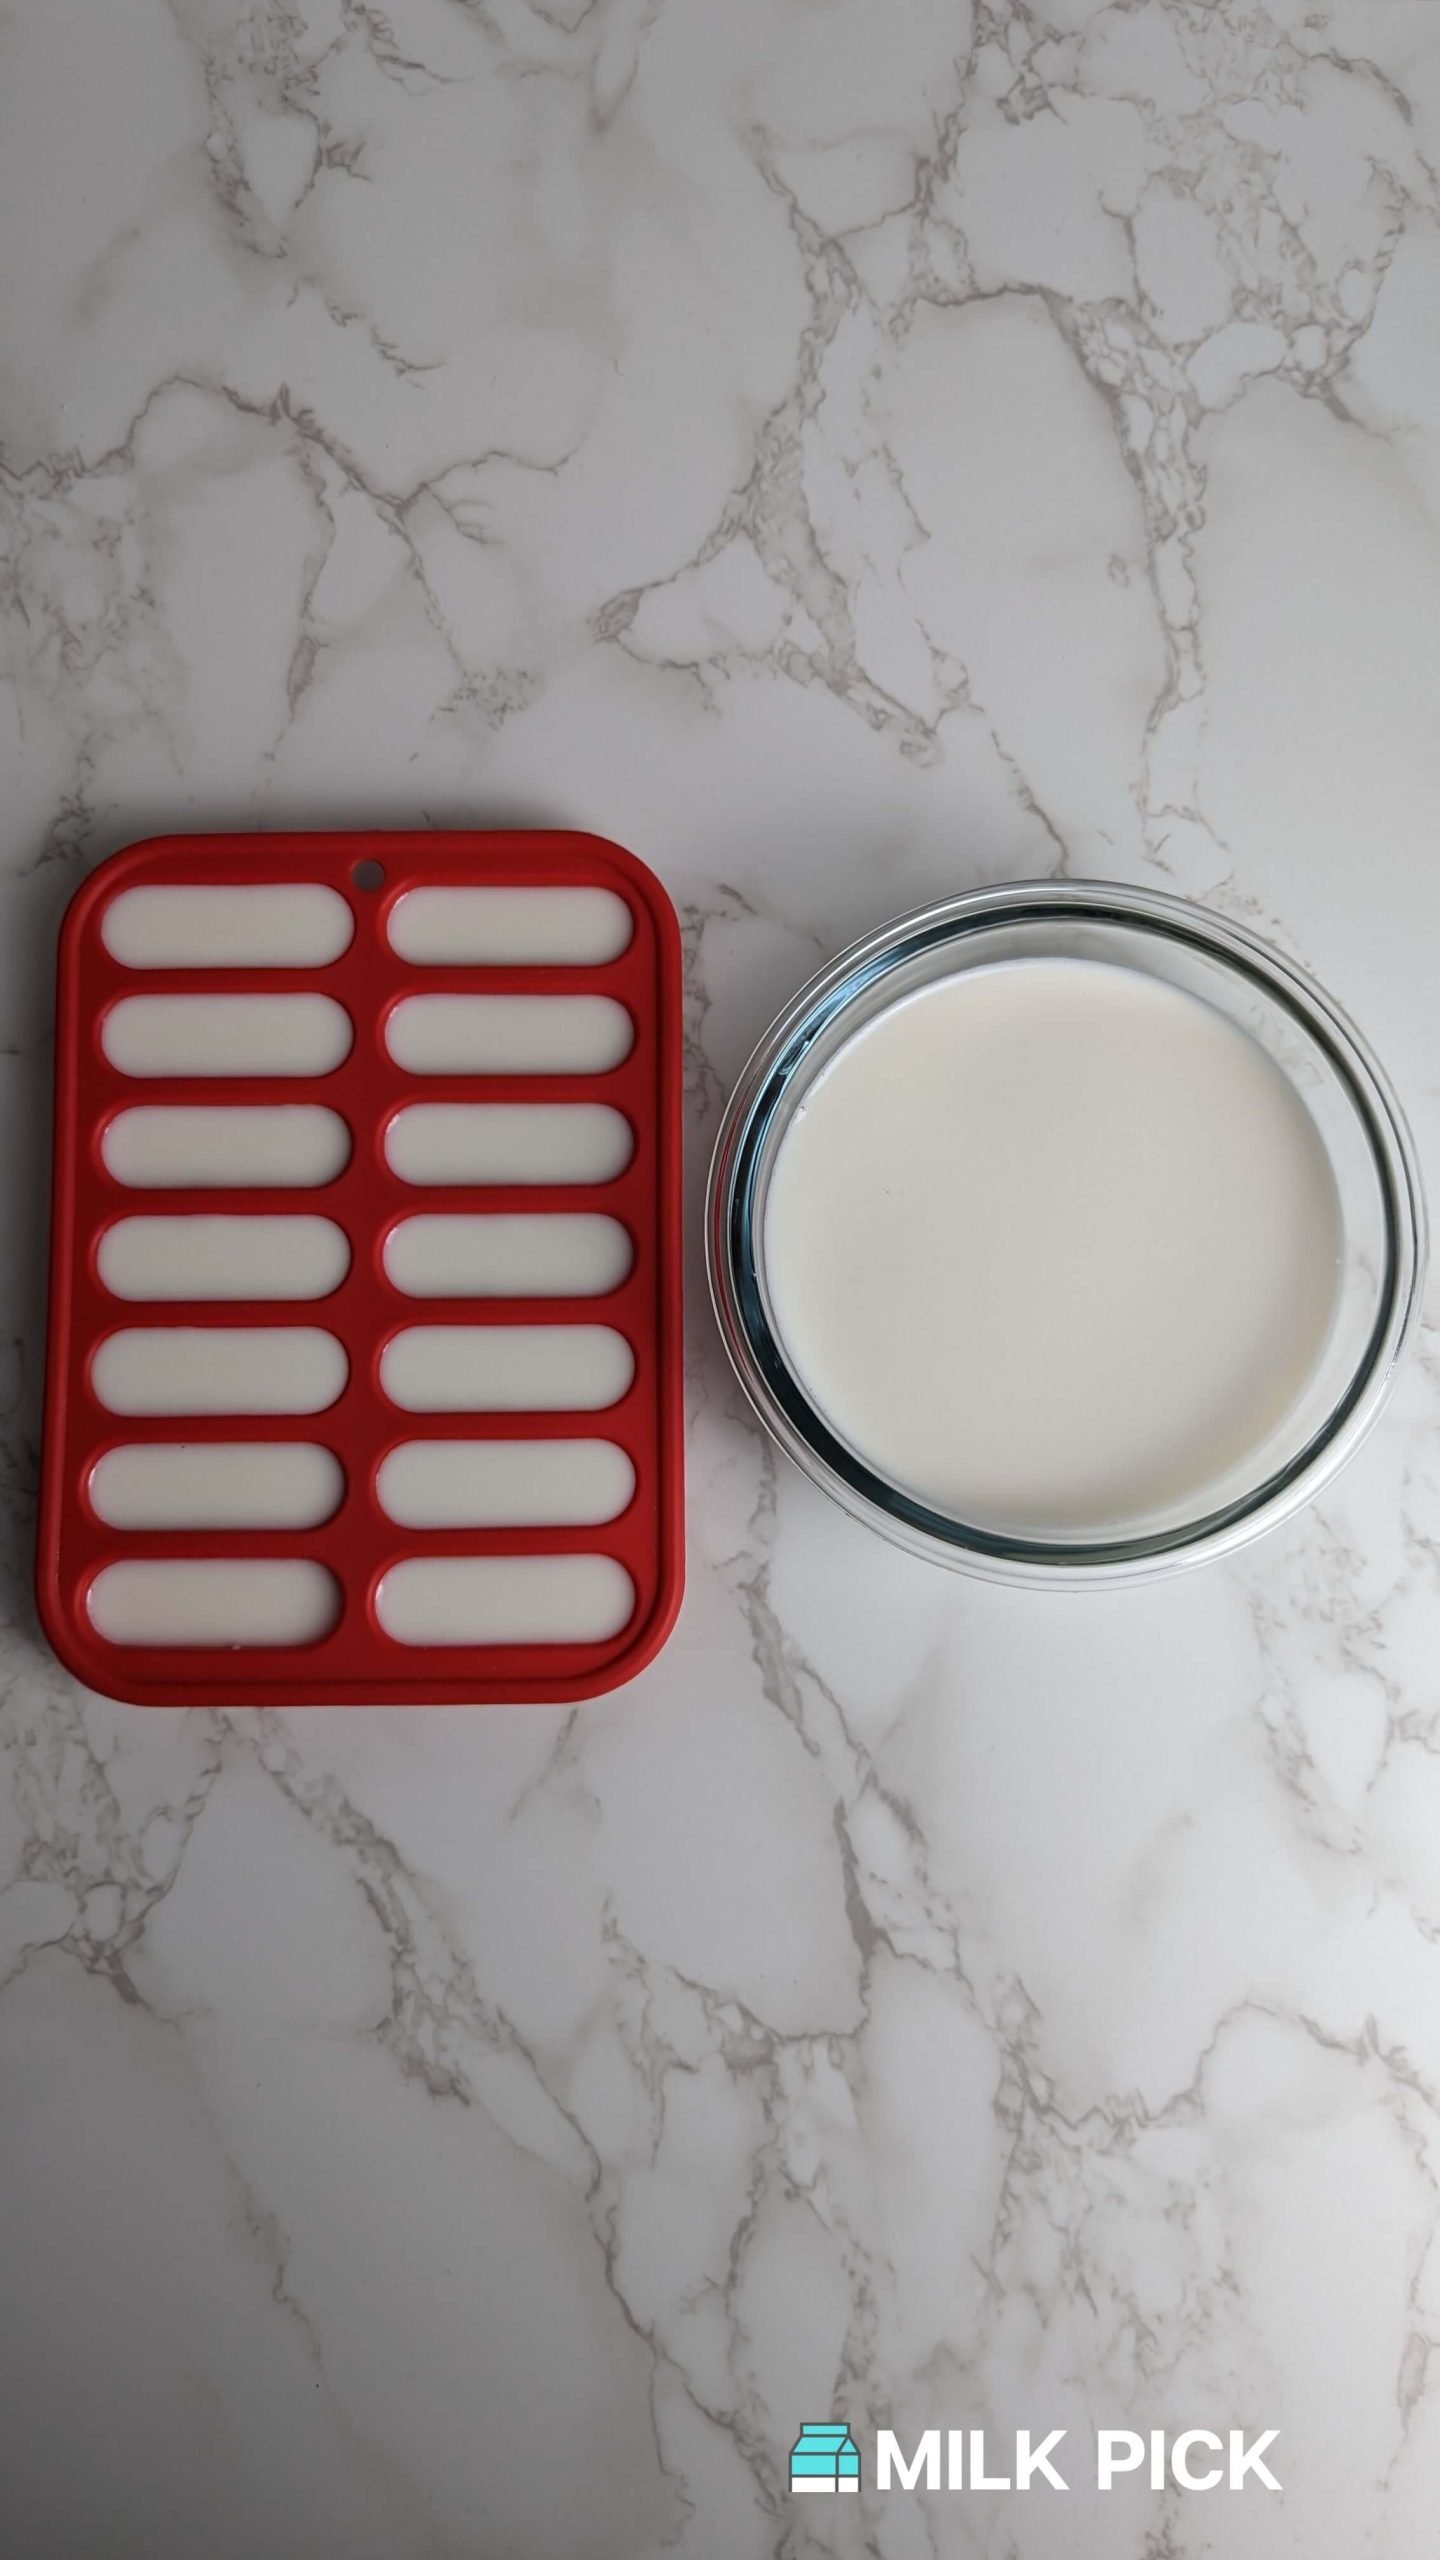 almond milk in ice cube tray and glass container side-by-side